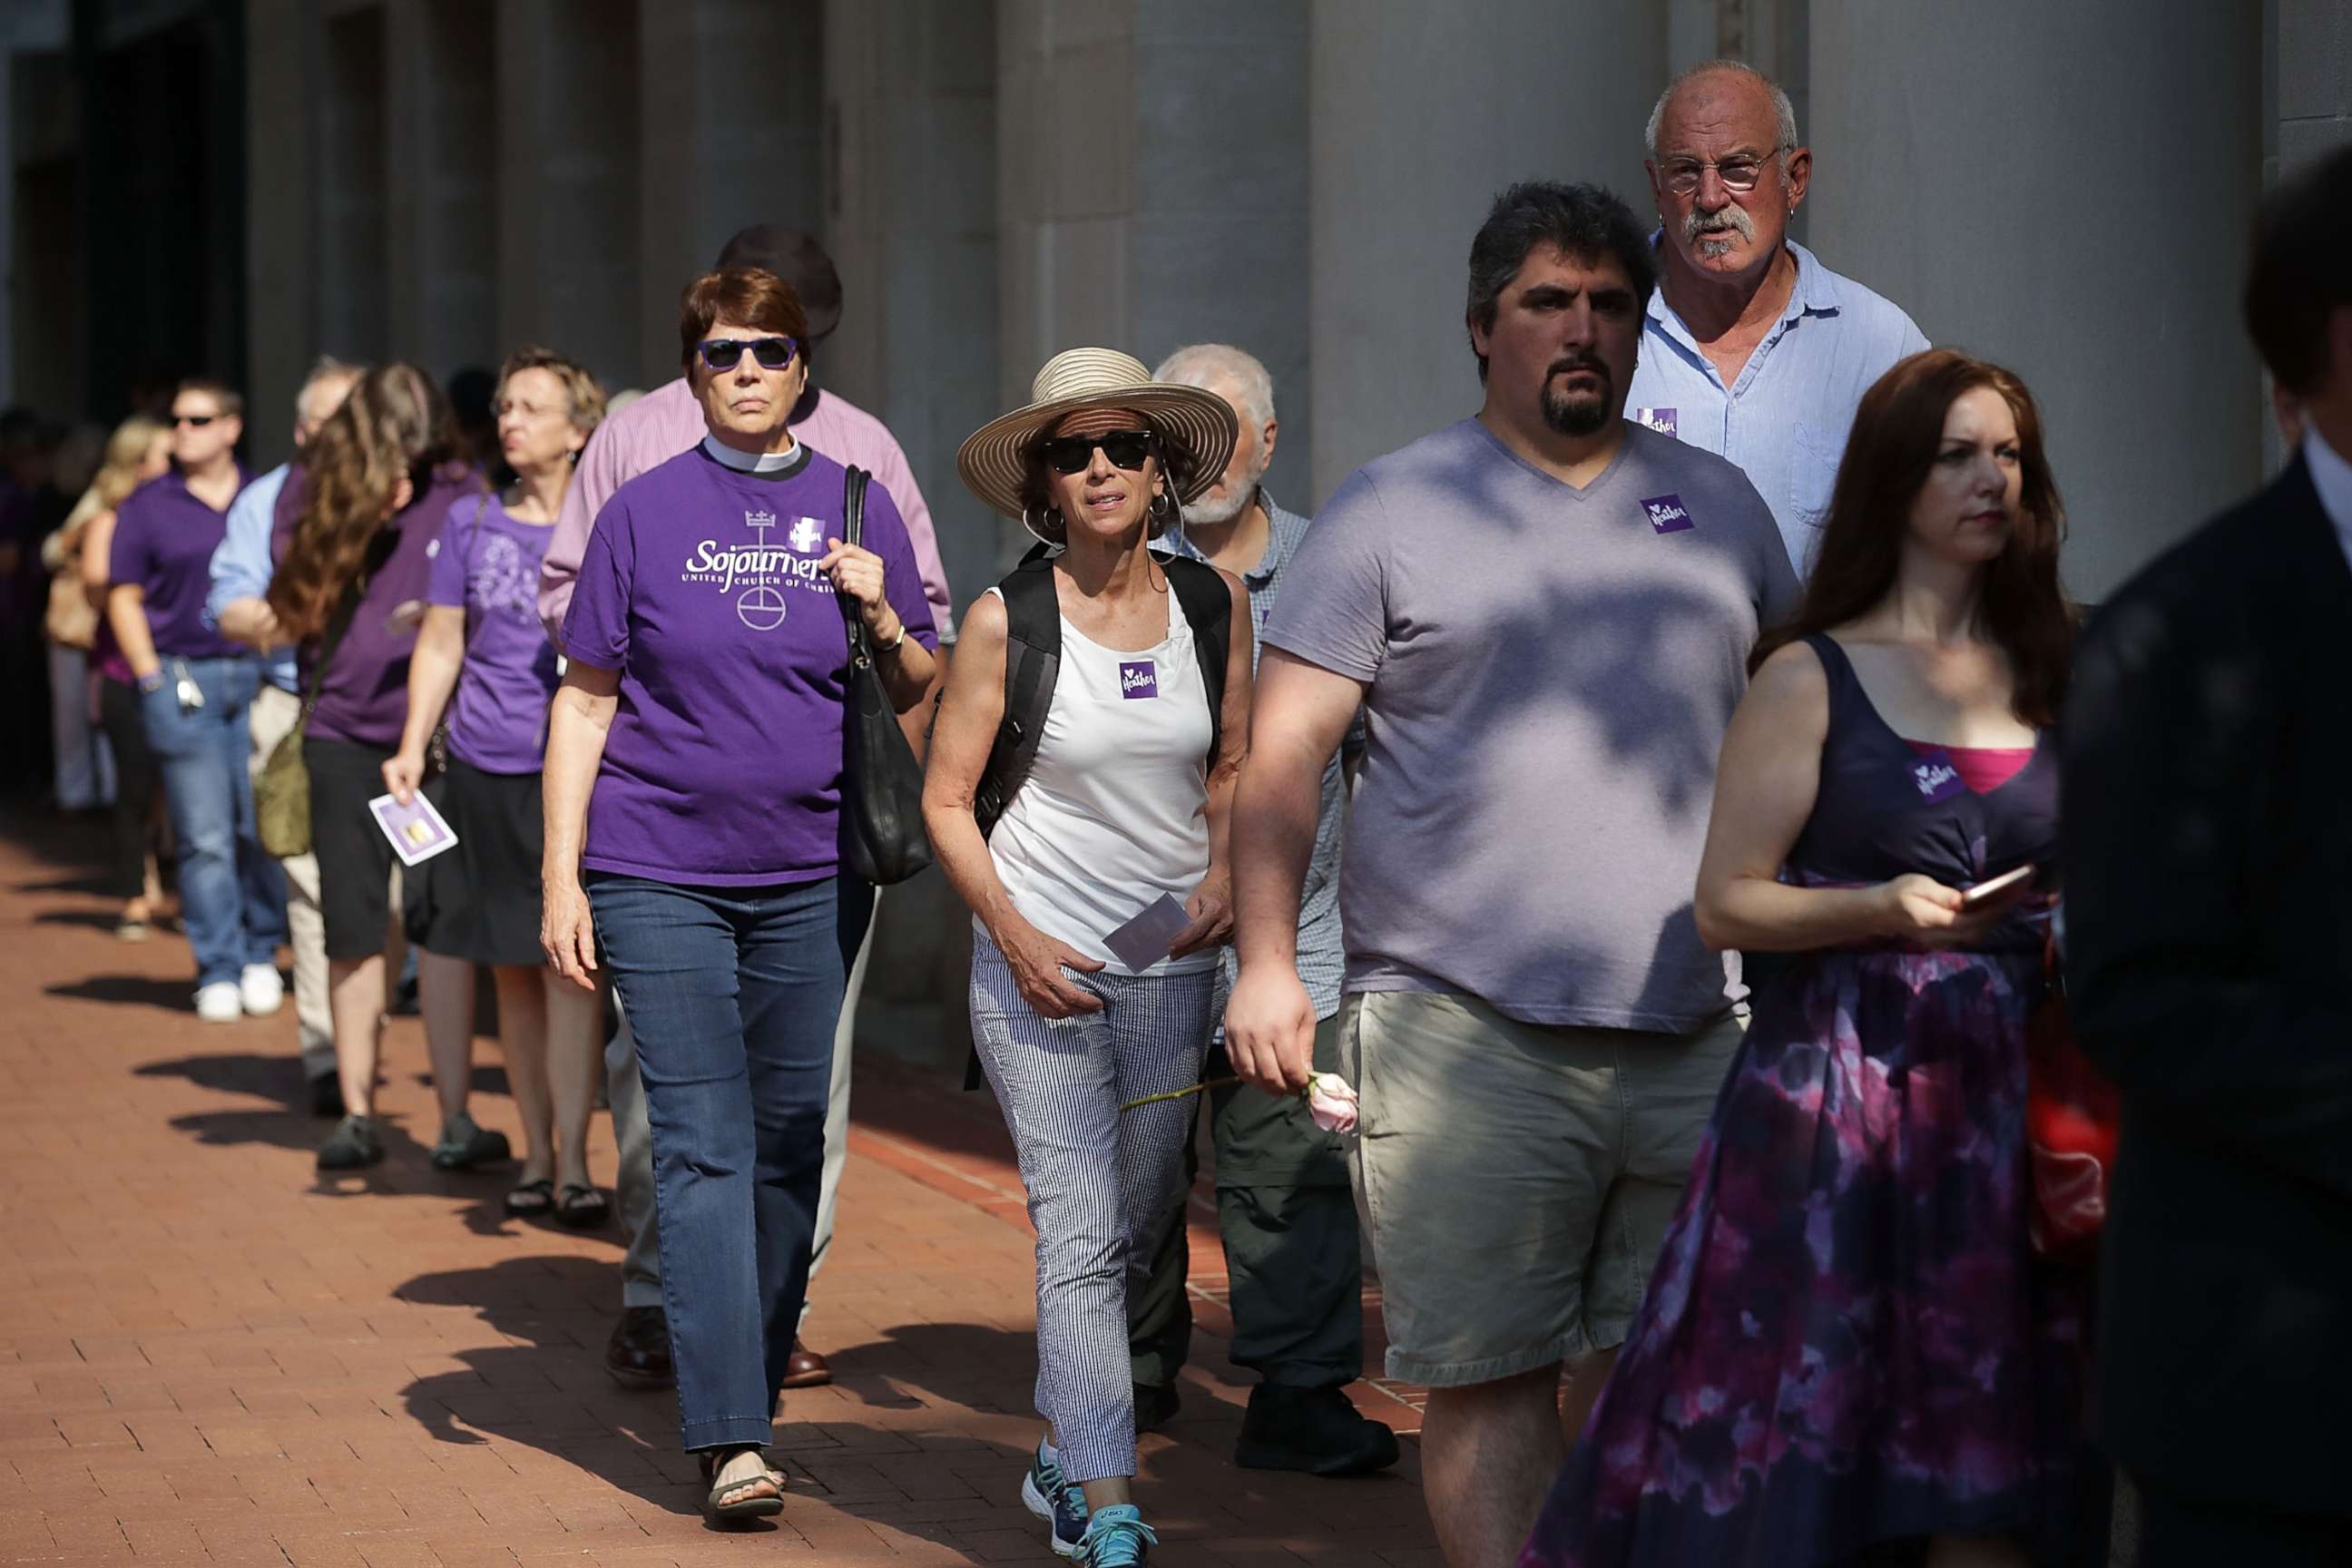 PHOTO: People line up to attend the memorial service for Heather Heyer, who was killed when a car slammed into a crowd of people protesting against a white supremacist rally, Aug. 16, 2017, in Charlottesville, Va.